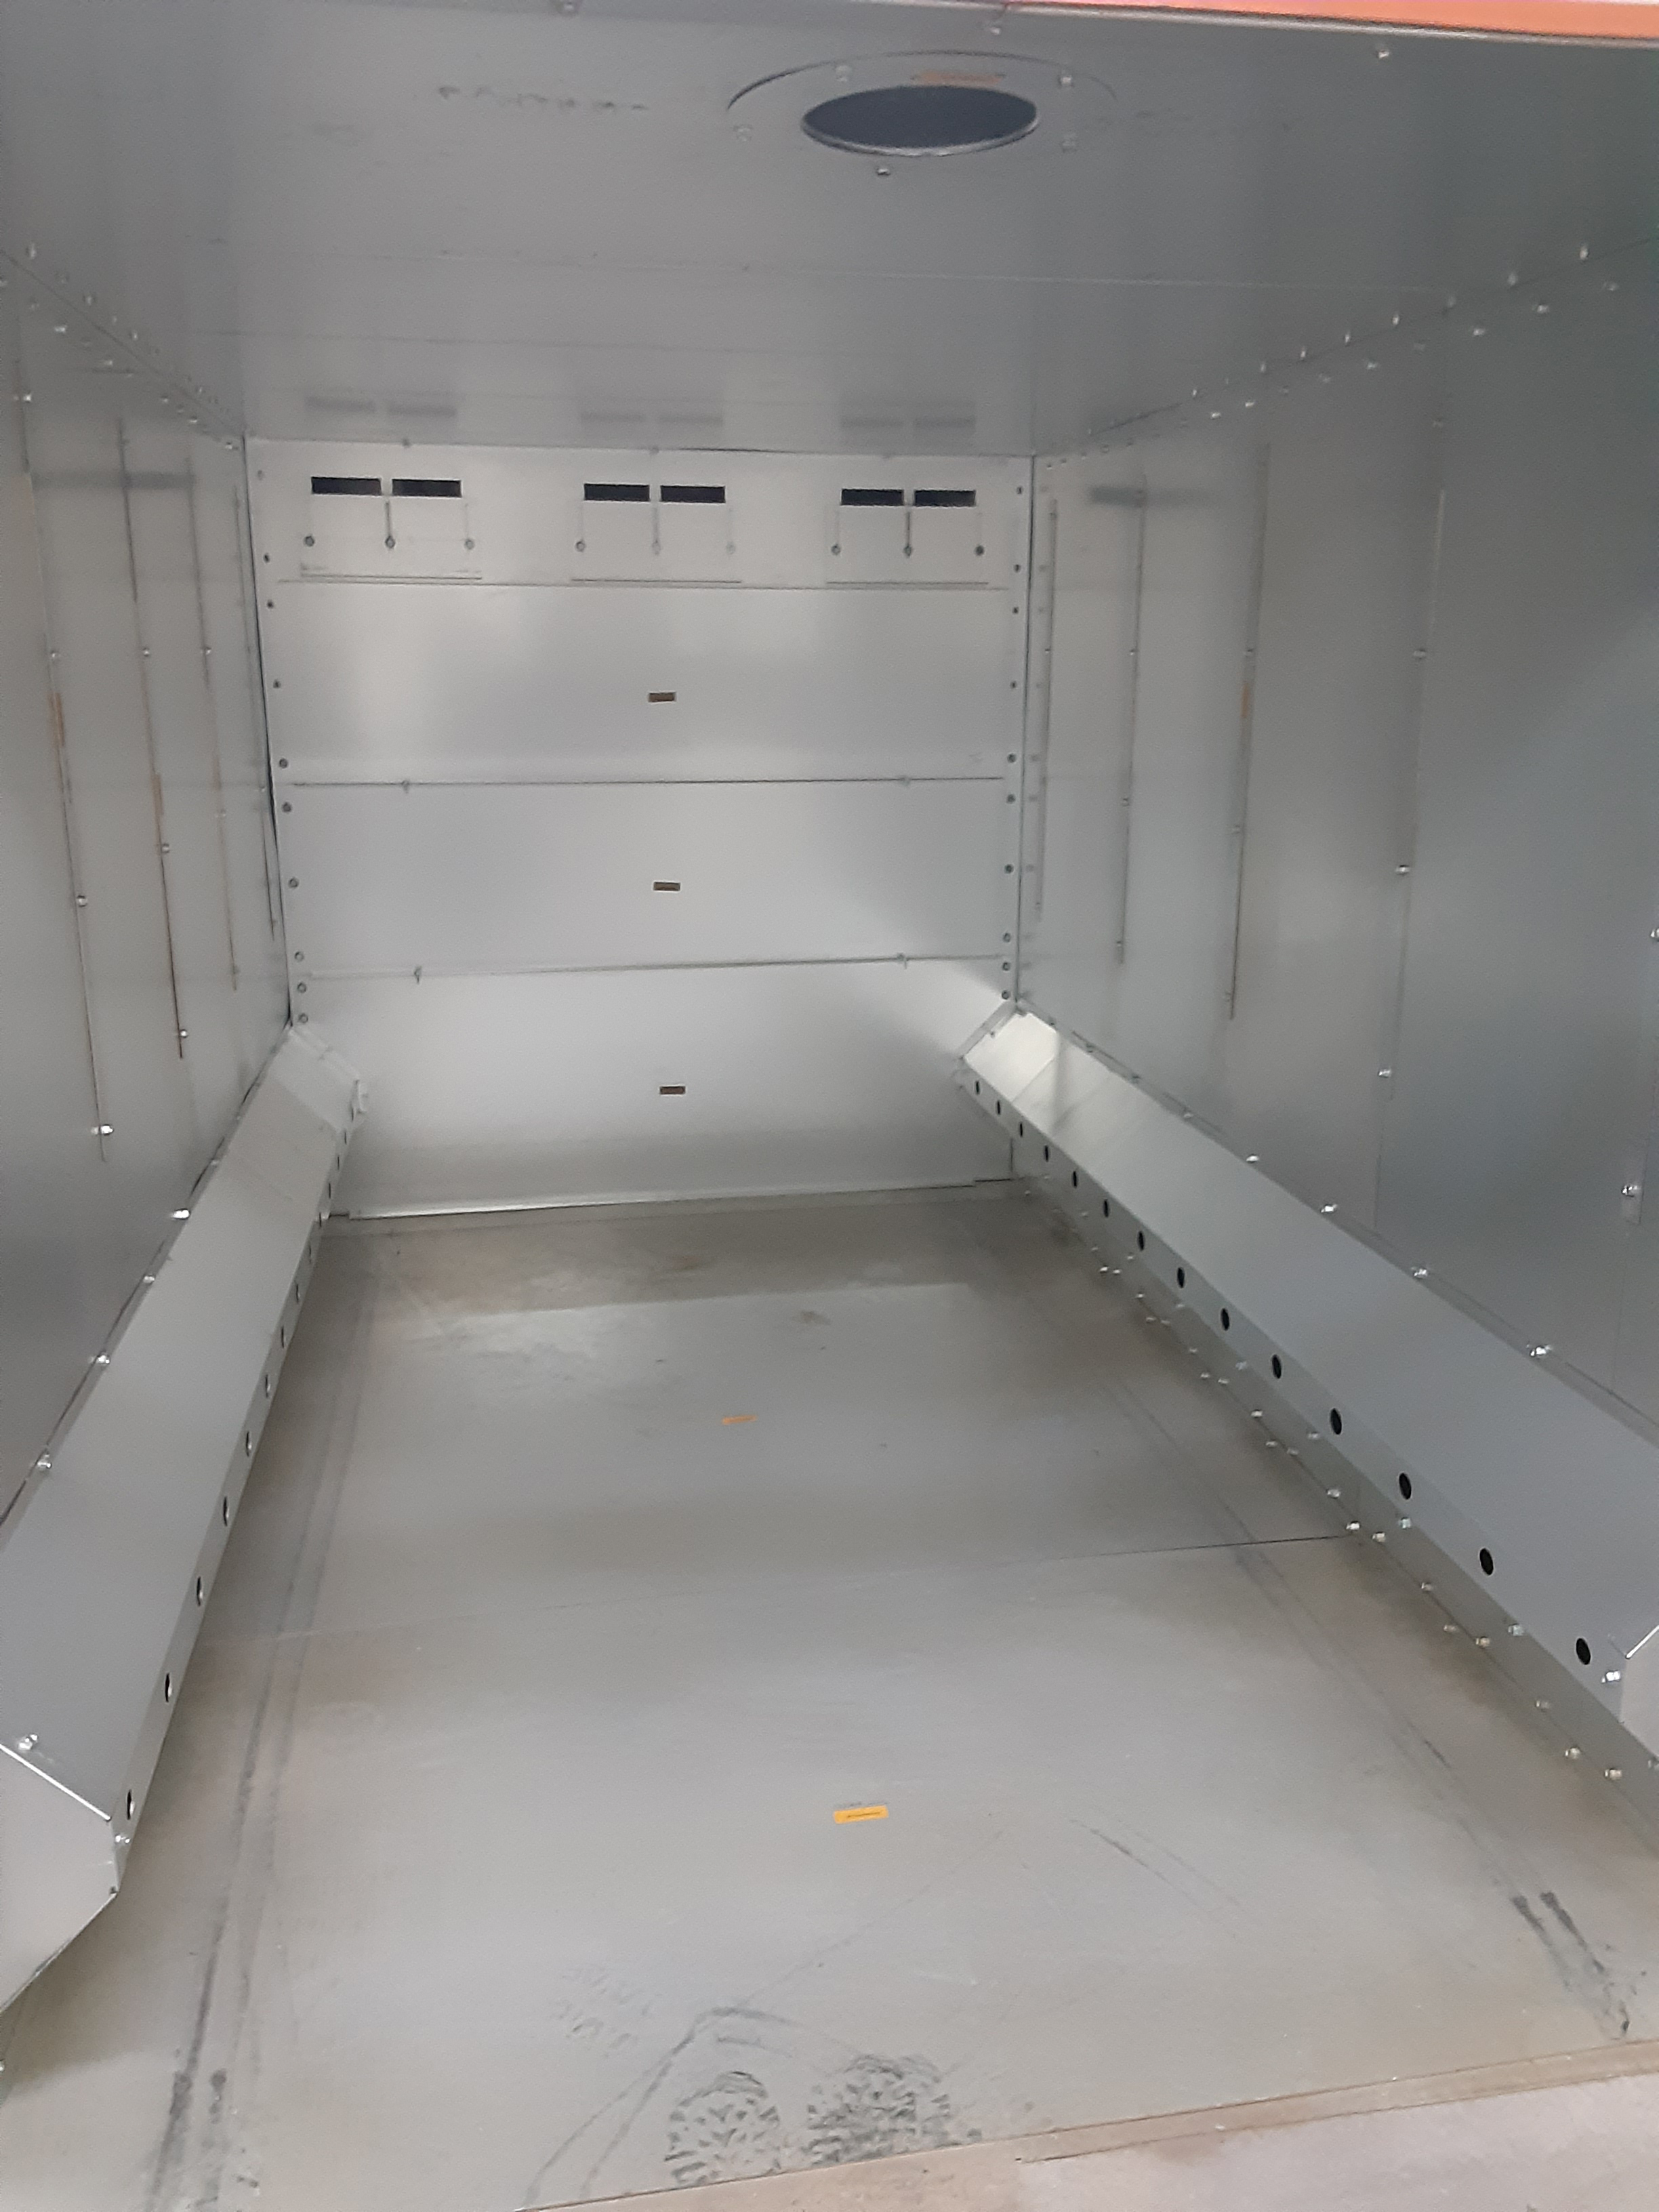 The inside of Wild Mtn Innovations powder coat paint oven